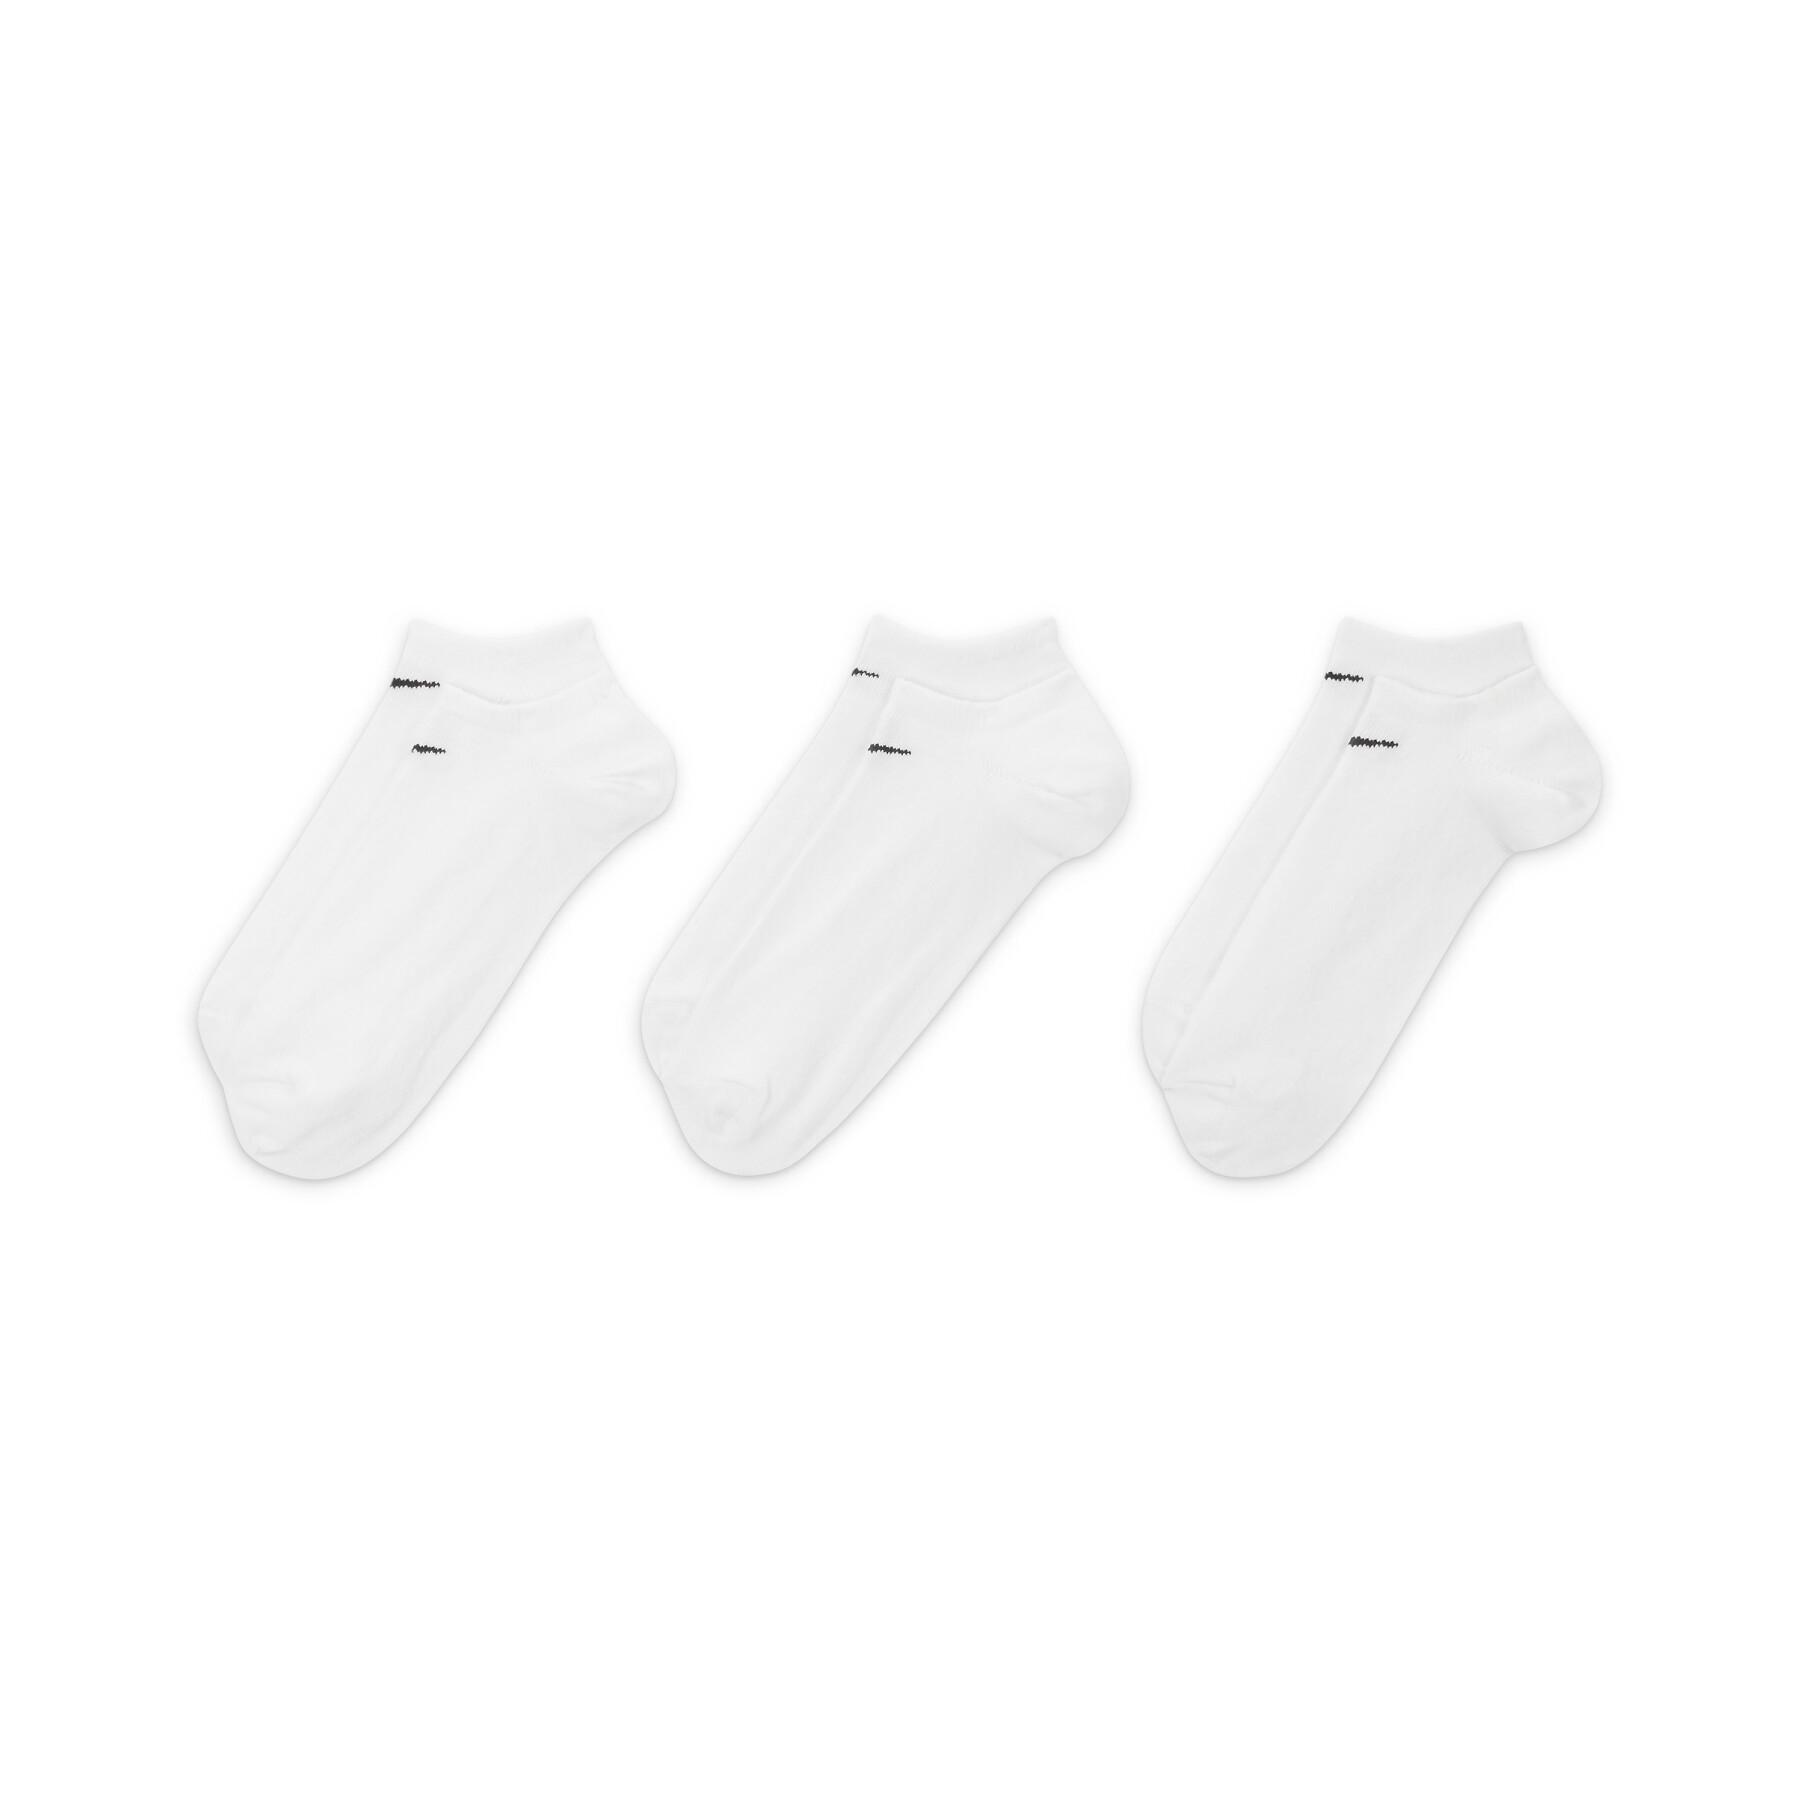 Pack of 3 pairs of low socks Lightweight - - Textile - wear